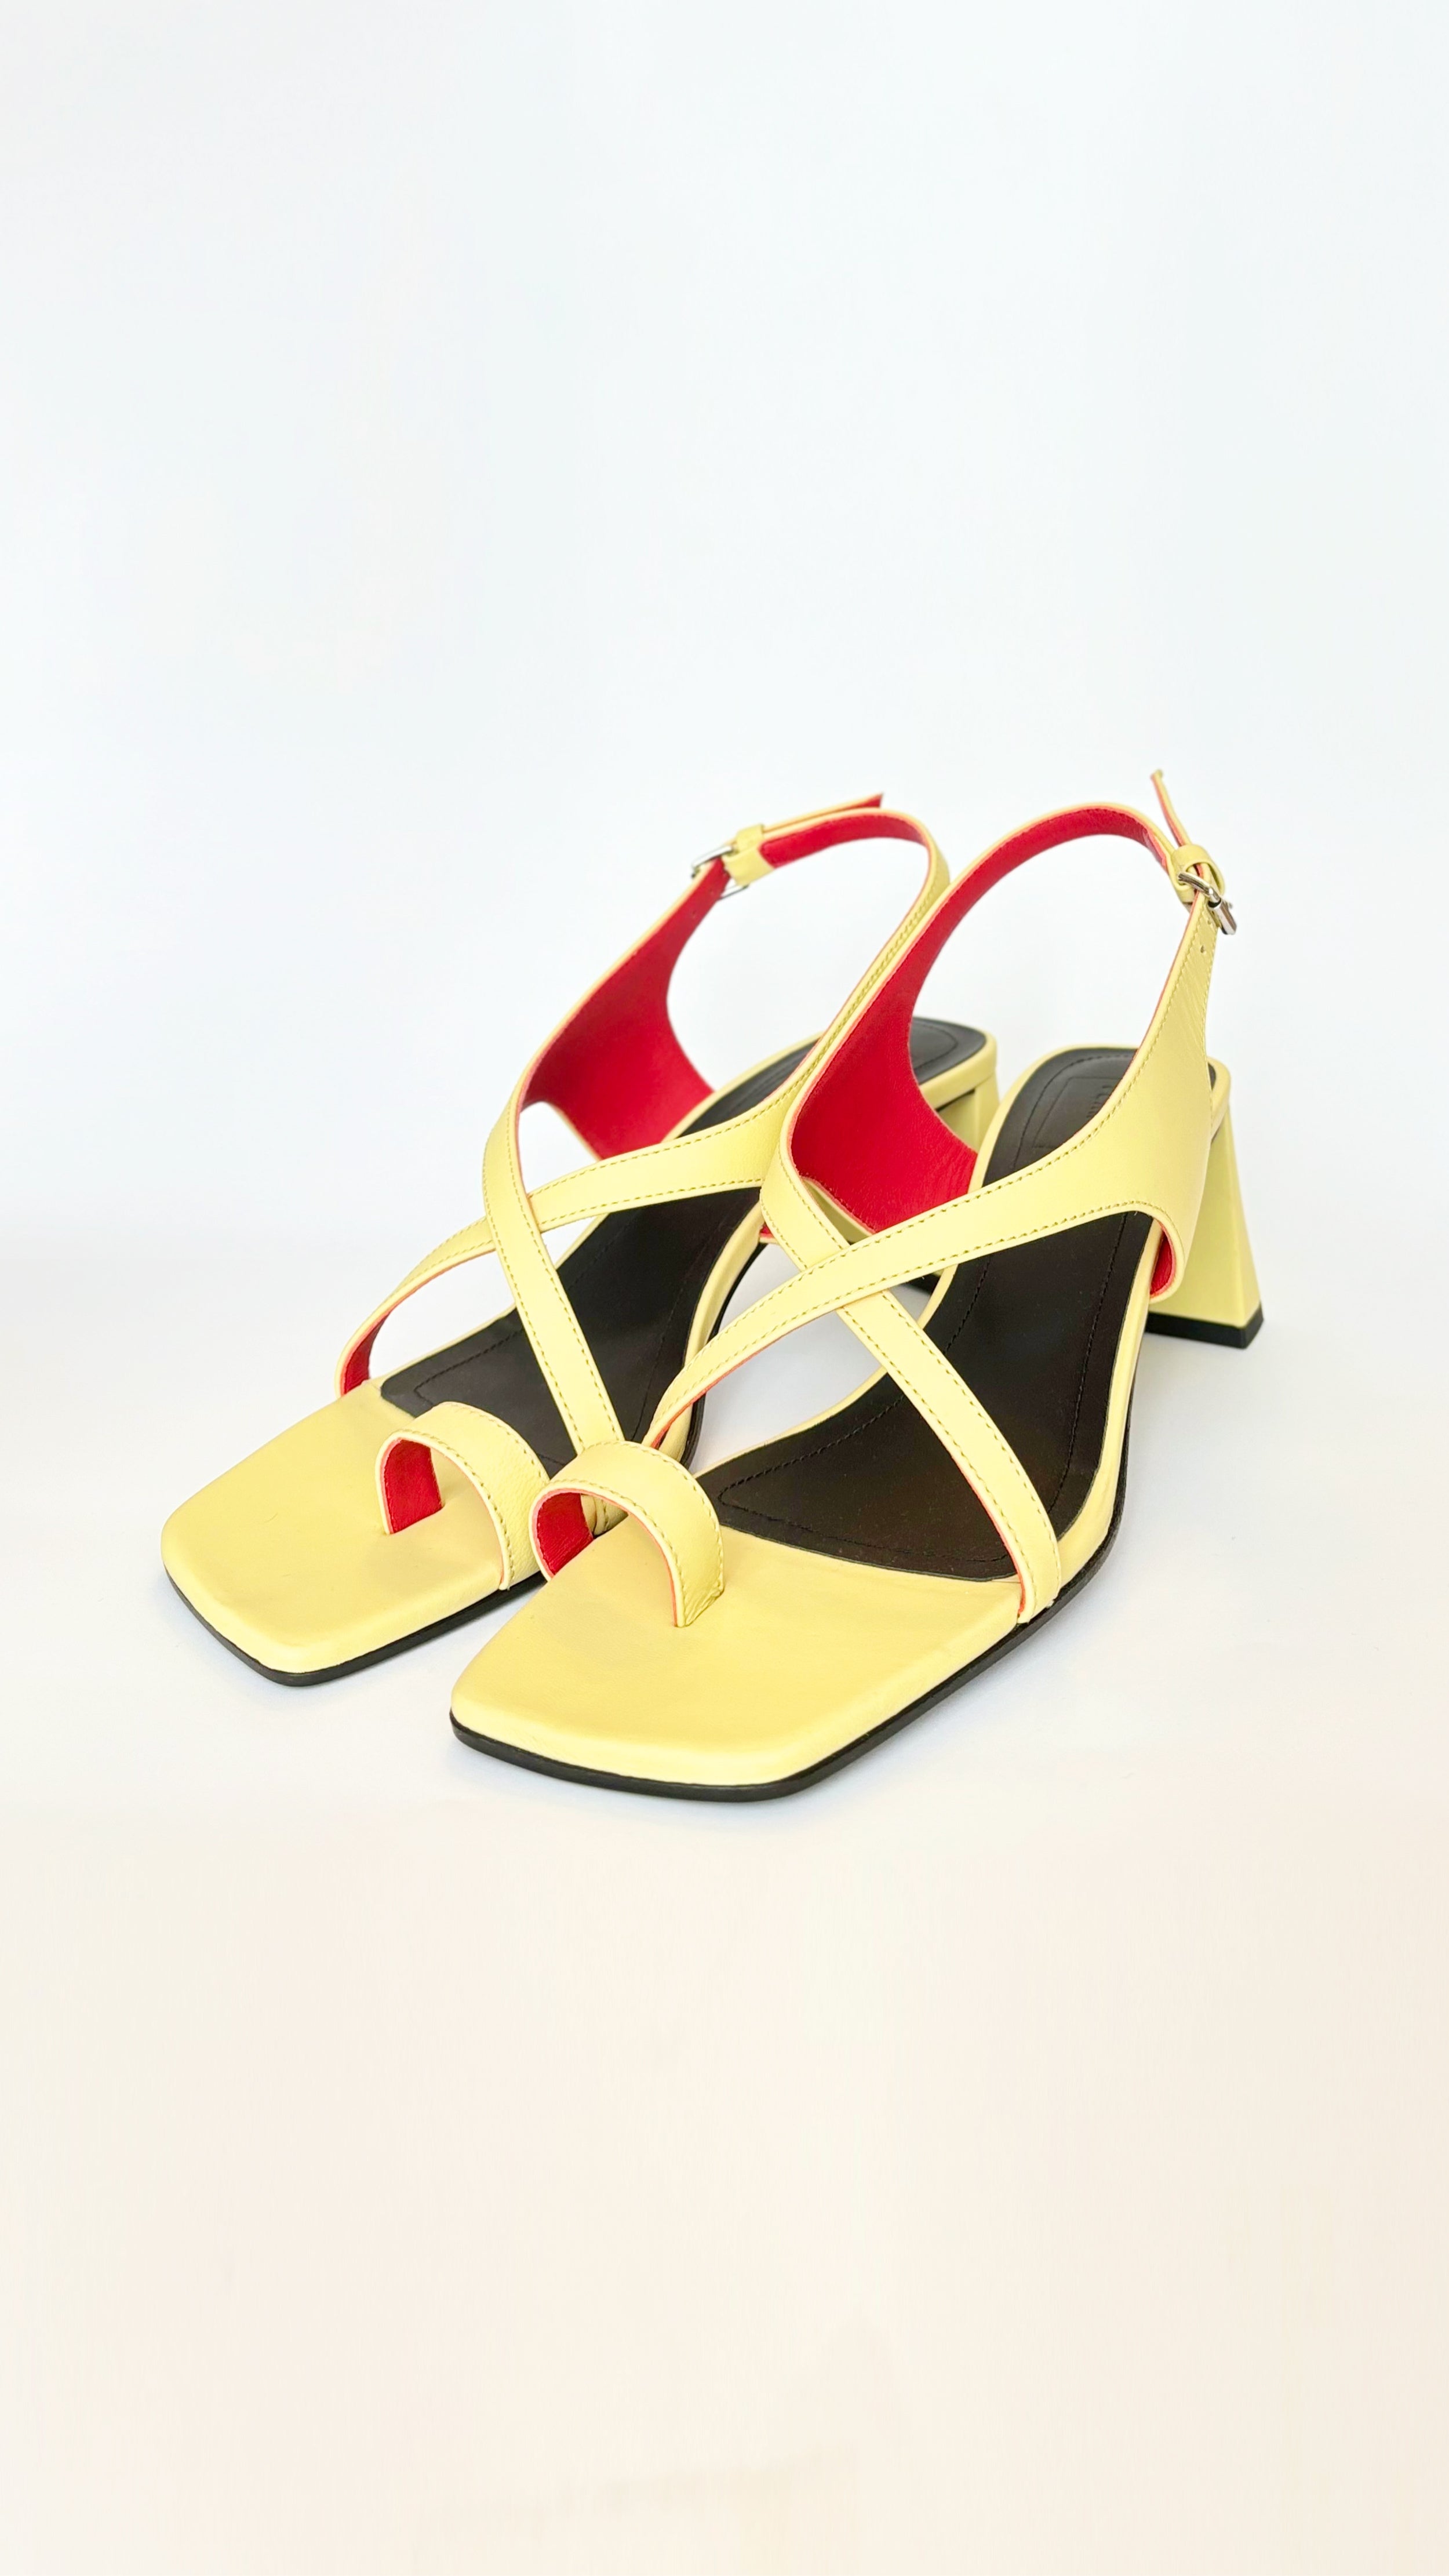 Plan C Crisscross Toe-Loop Slingback Sandals. In yellow leather exterior with a pop of red interior. It features one toe loop, open toe heeled sandal with a criss cross of leather acorss the top. Stack heel in the back. Pair shown facing front and right.